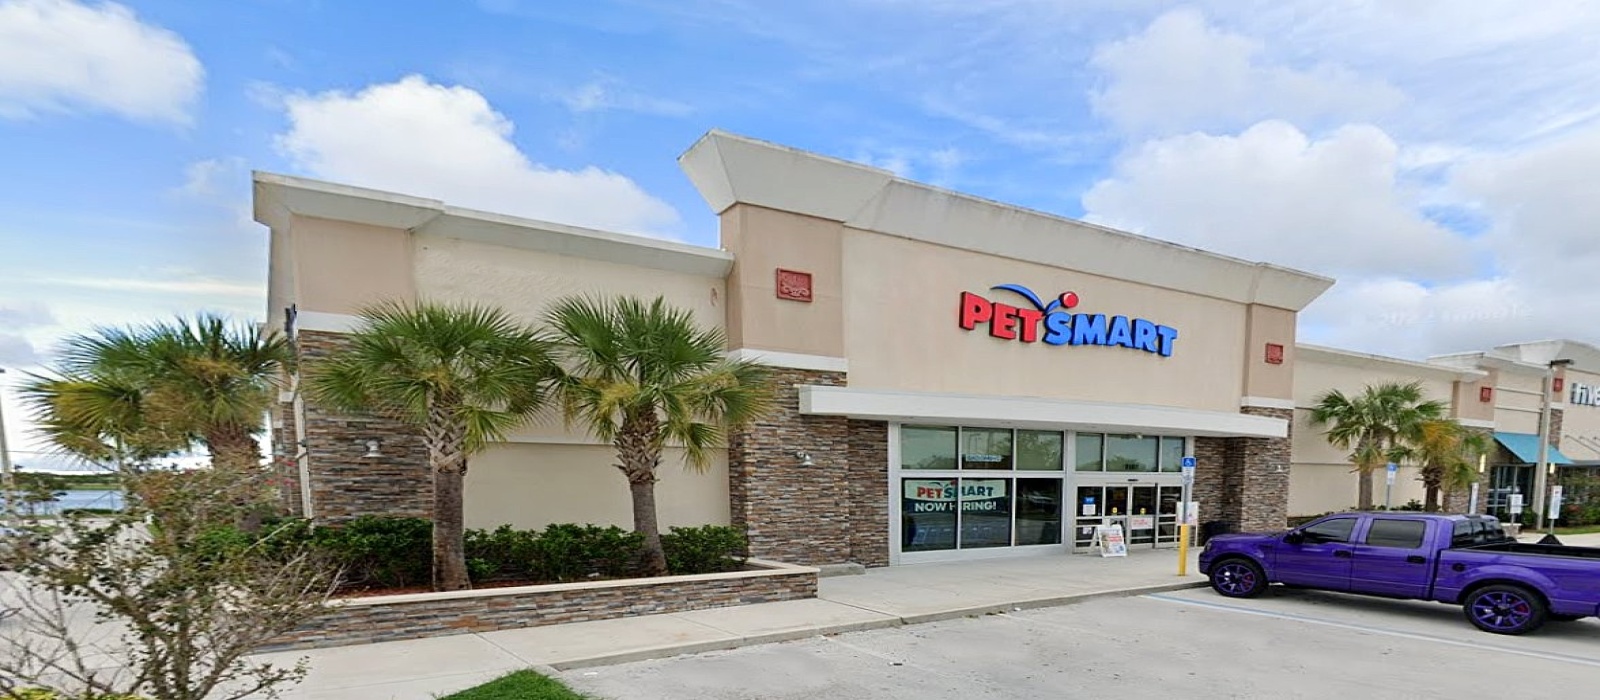 7161 Lake Andrew Drive, Melbourne, Florida 32940, ,Retail,Net Lease,7161 Lake Andrew Drive,1175